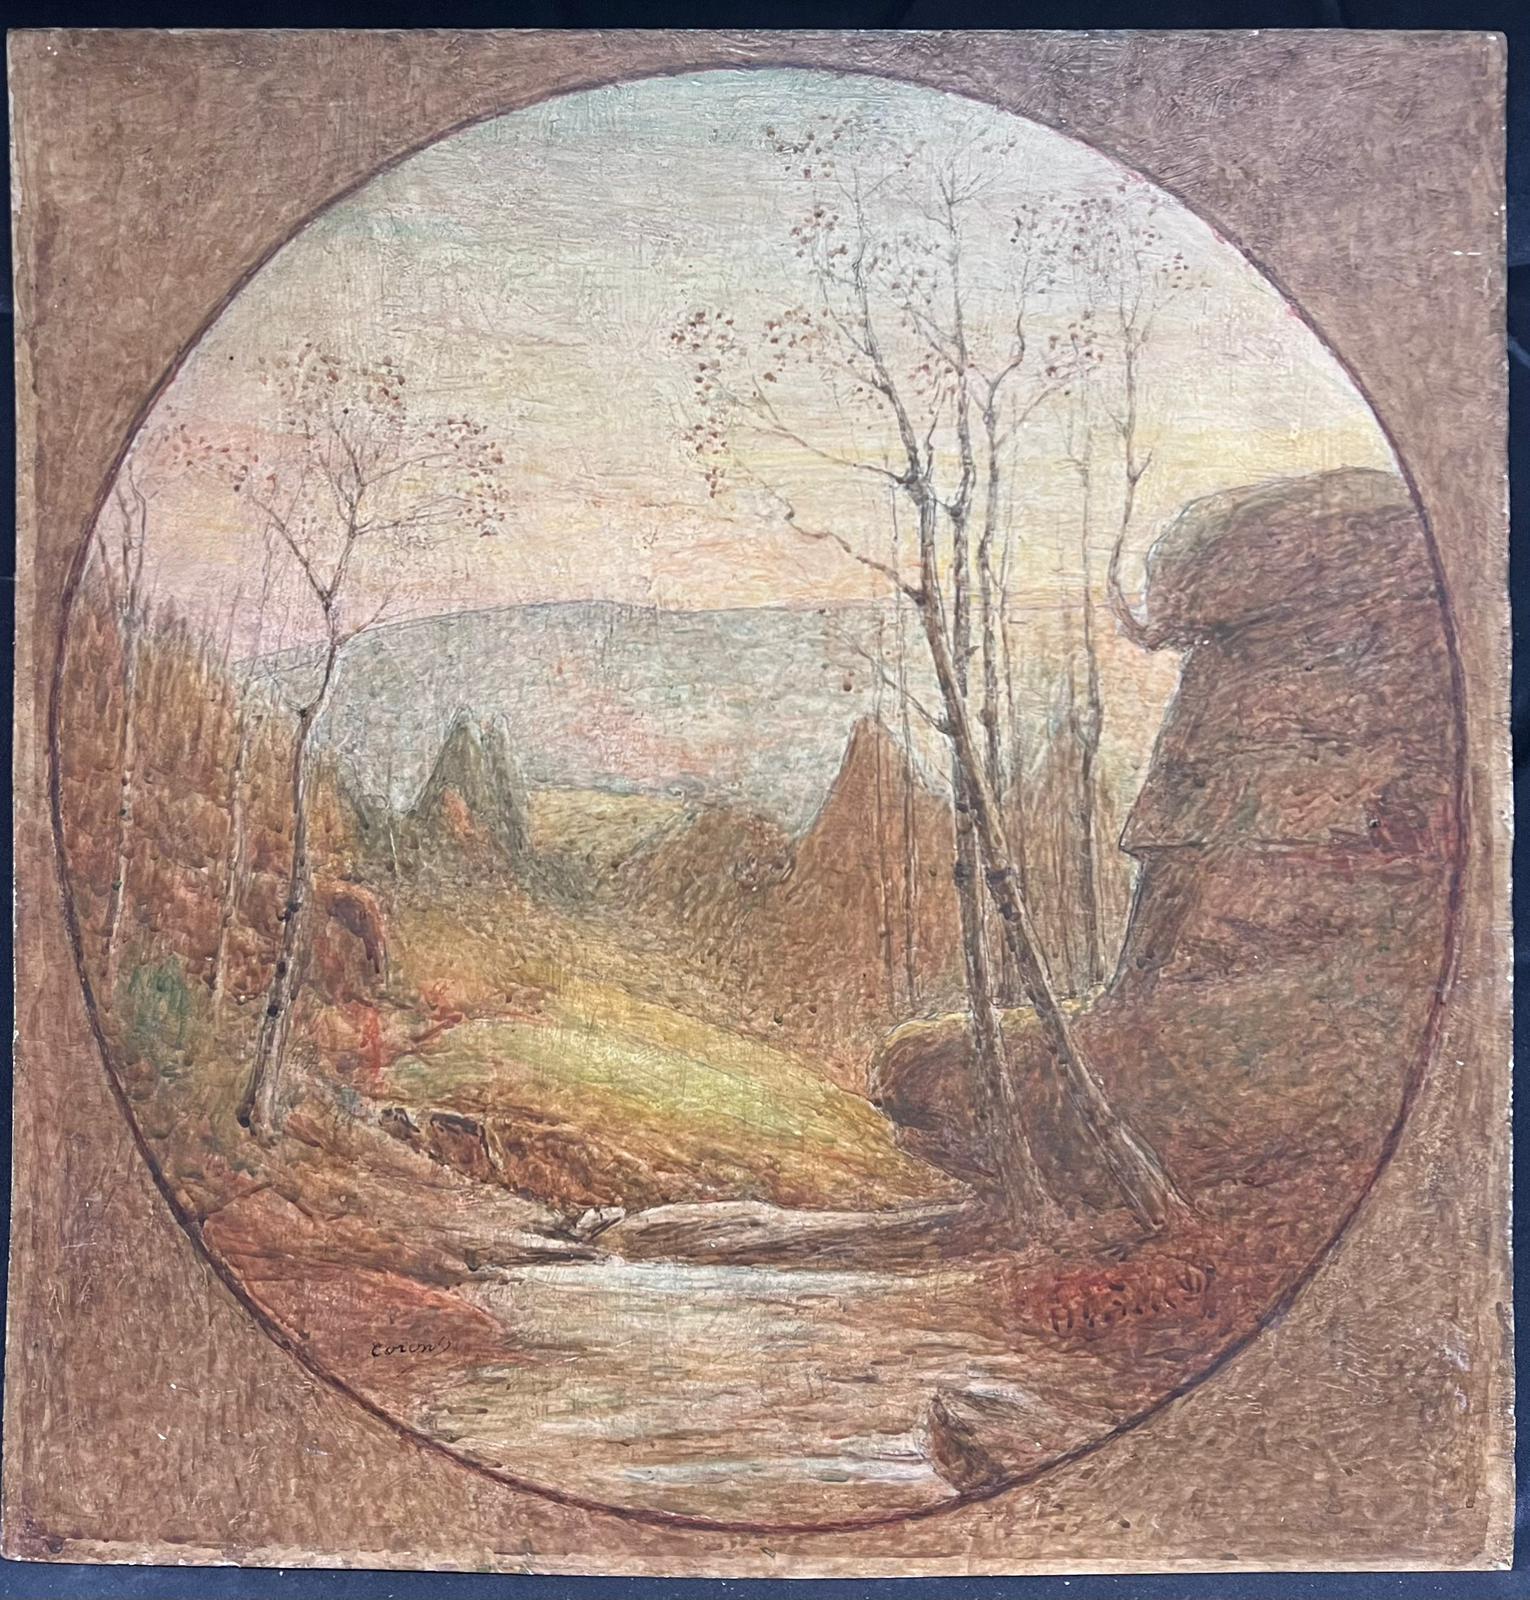 Symbolist Landscape
French school, indistinctly signed
oil on wooden board, unframed
board: 24.5 x 24 inches
inscribed verso
provenance: private collection, France
condition: a few surface scuffs and marks but generally good and sound condition 